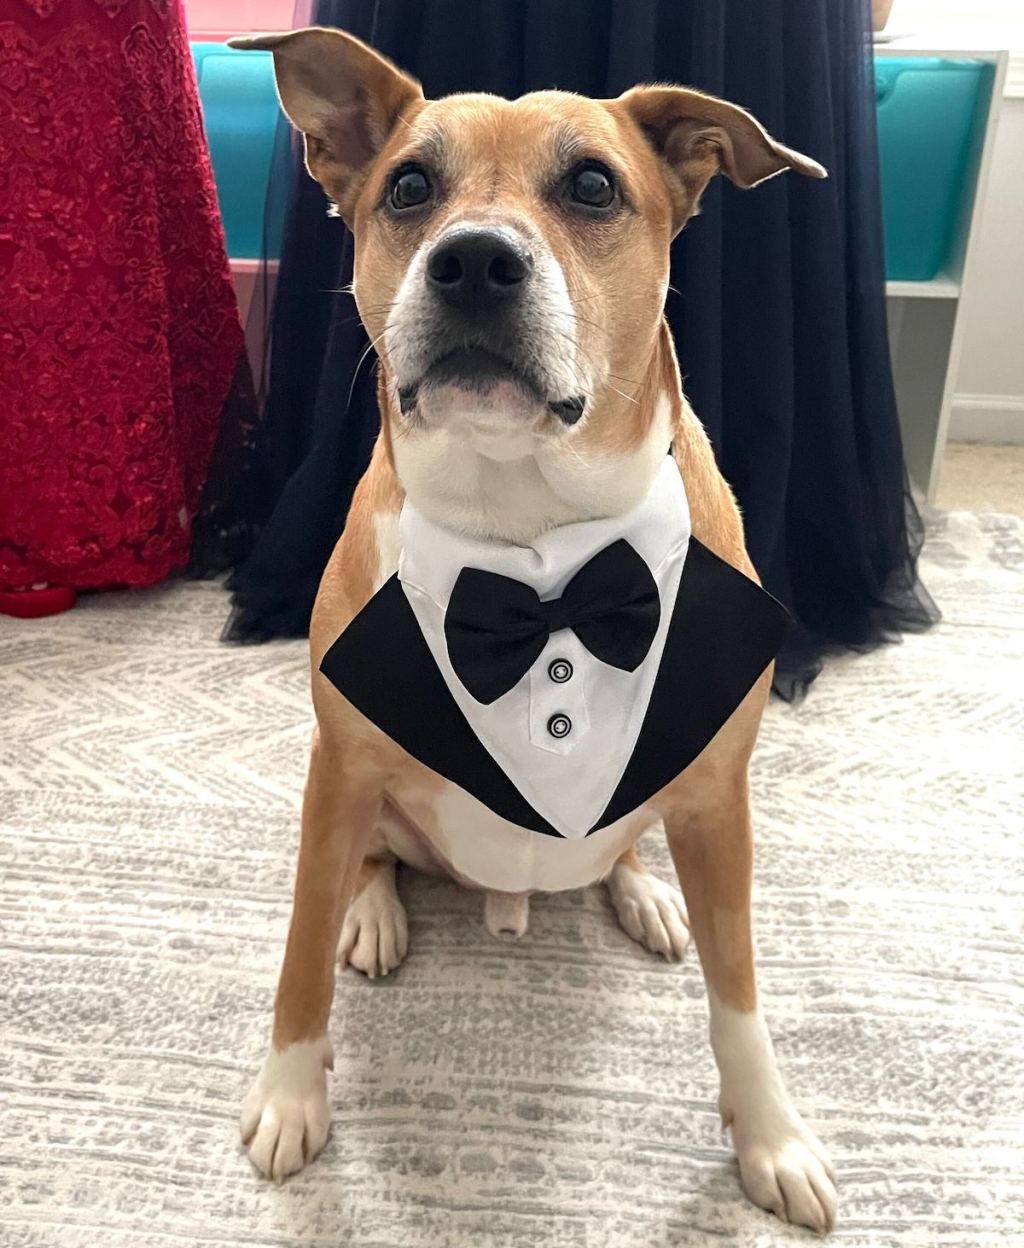 dog wearing black and white tuxedo outfit